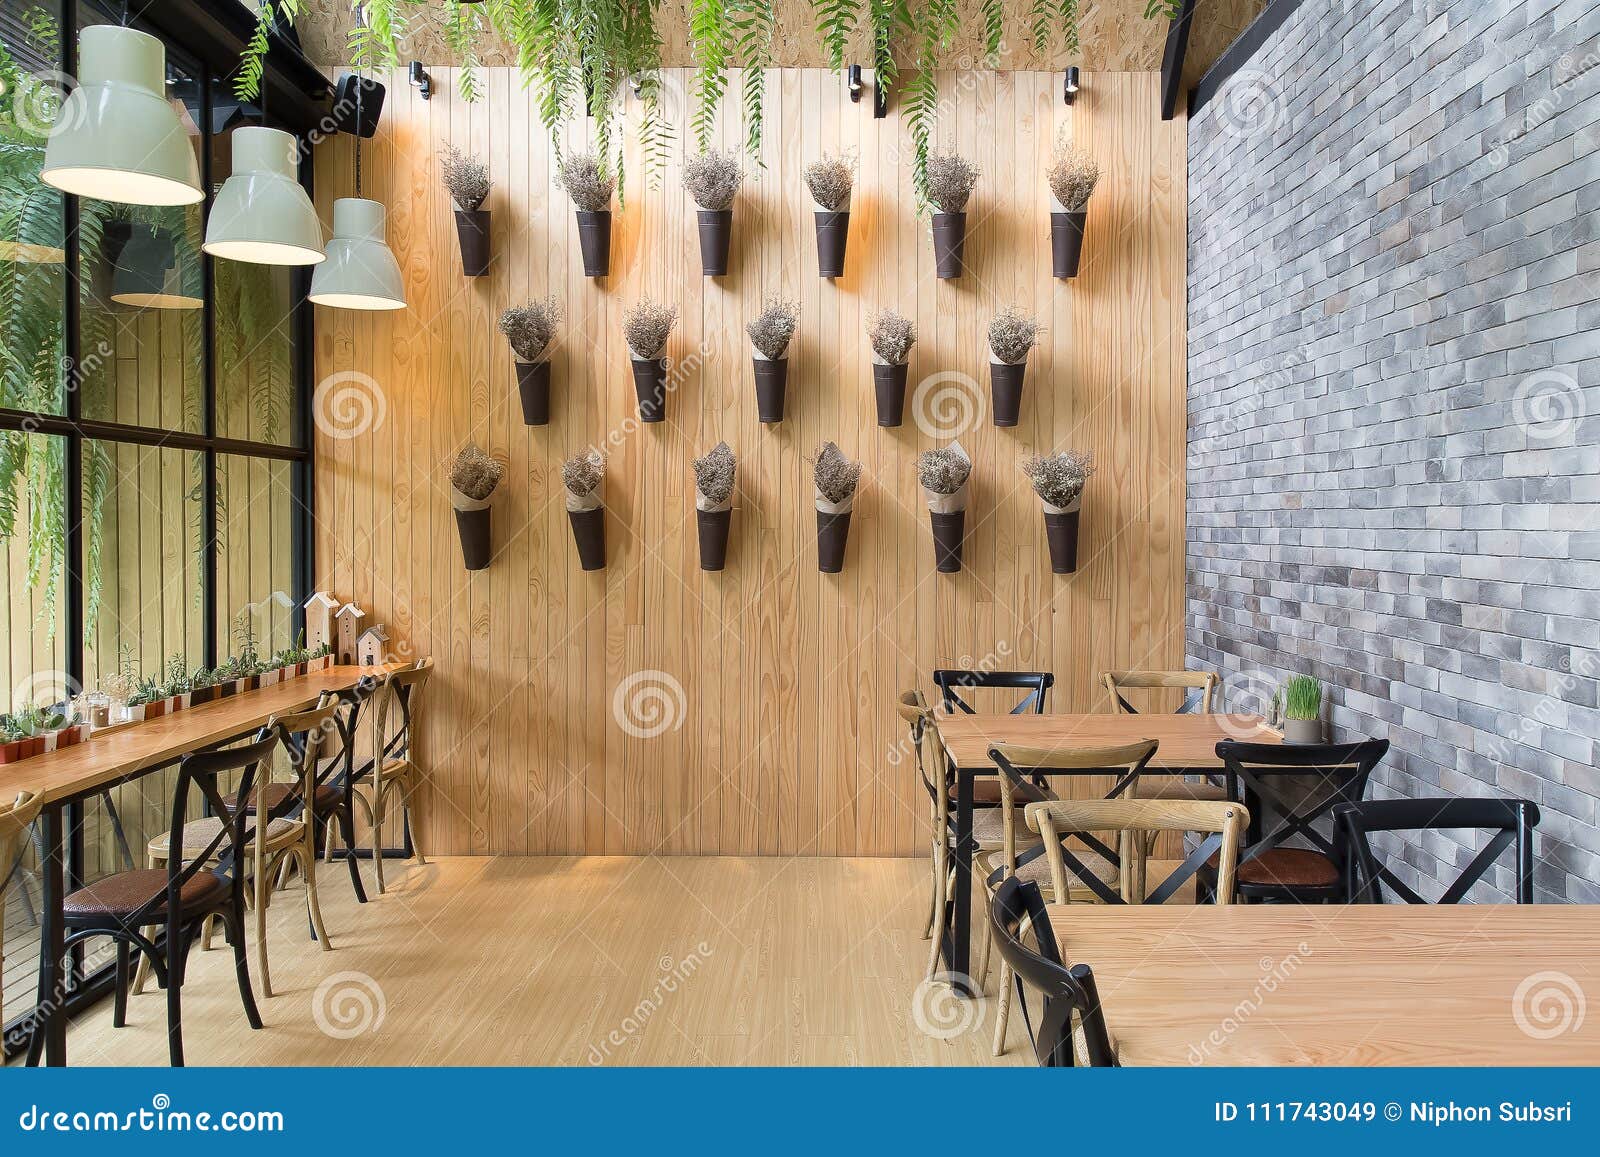 Cafe Wall Images  Free Download on Freepik